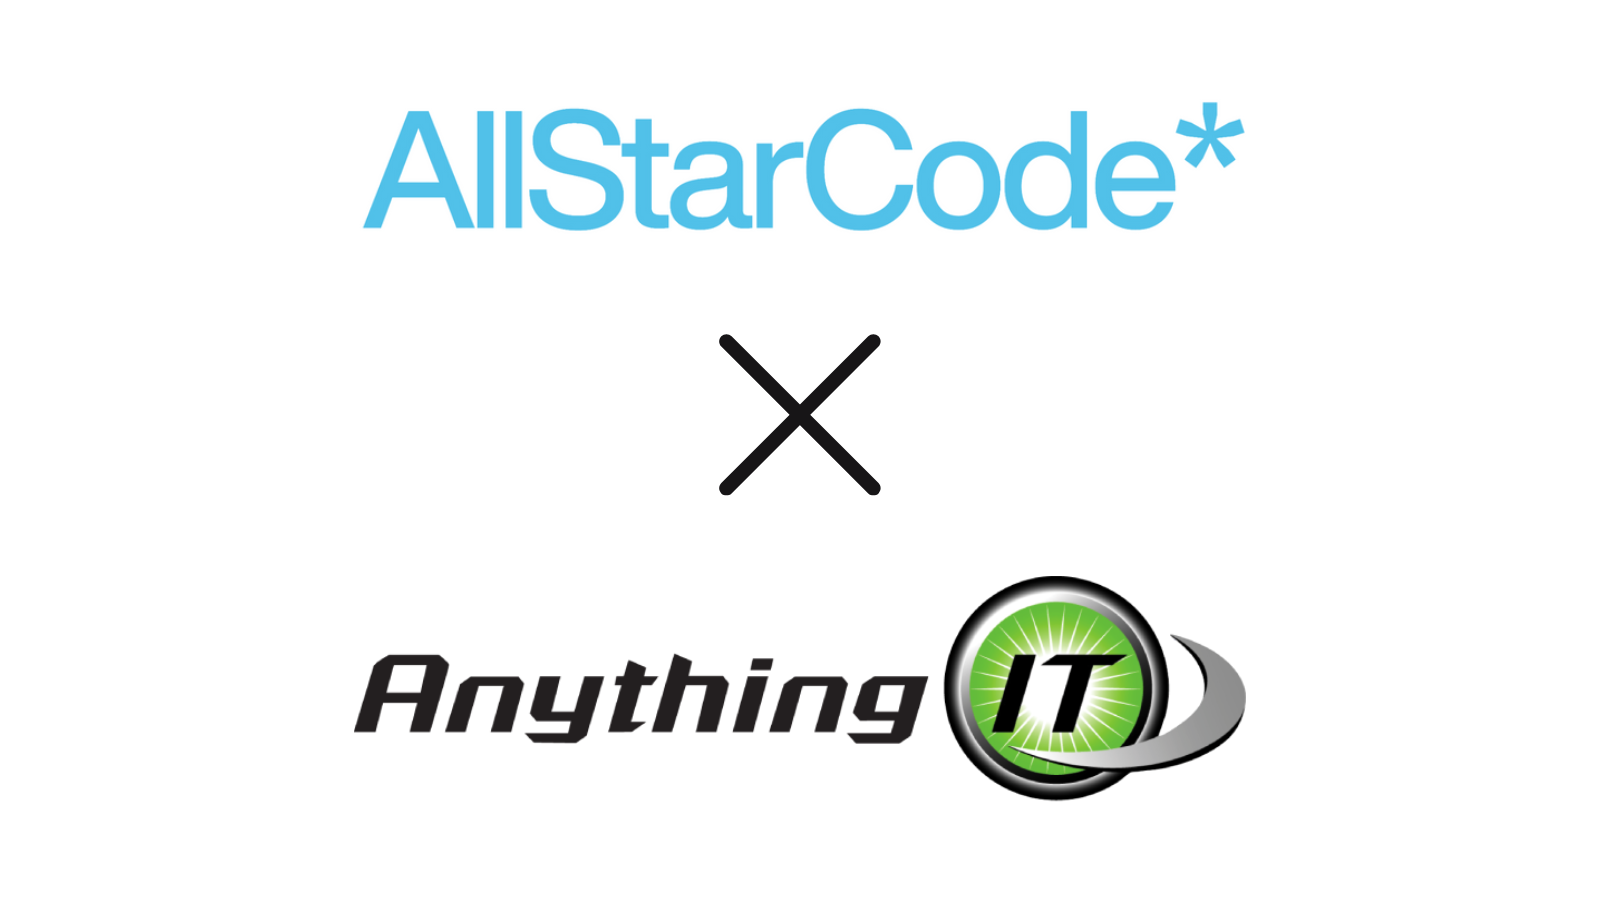 All Star Code Announces New Leadership Structure As Part Of Five